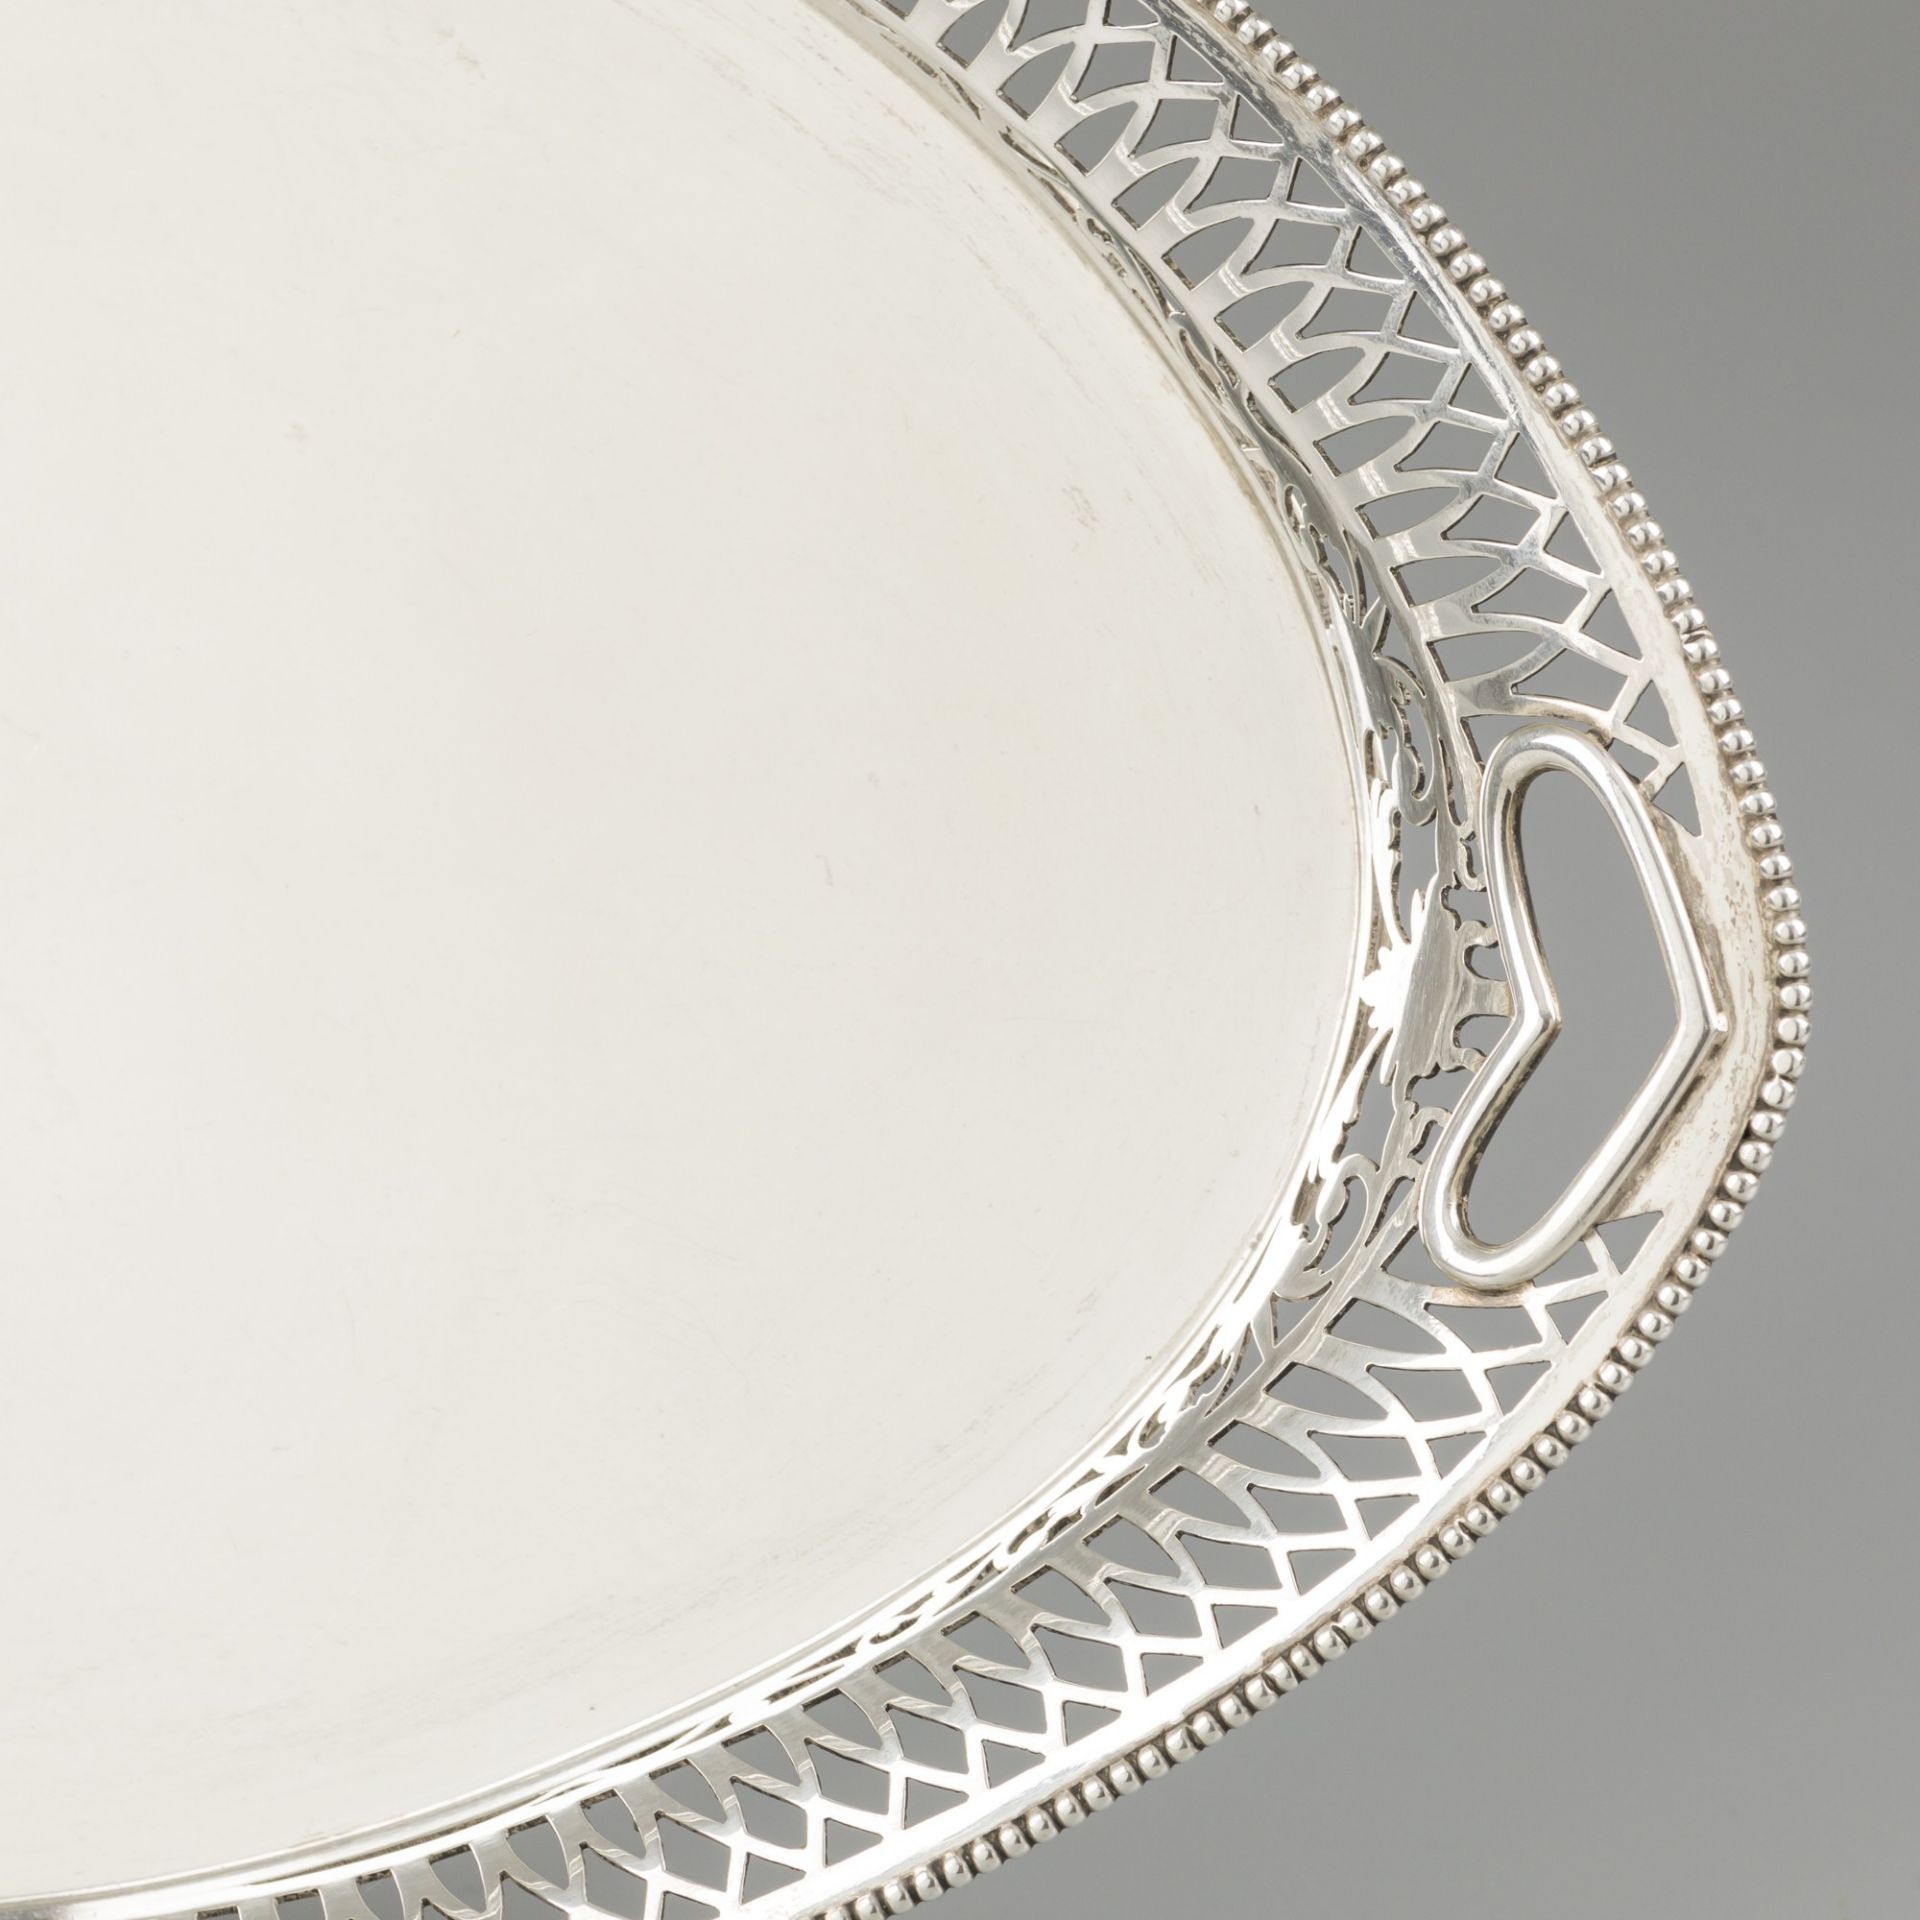 Silver serving tray. - Image 3 of 5